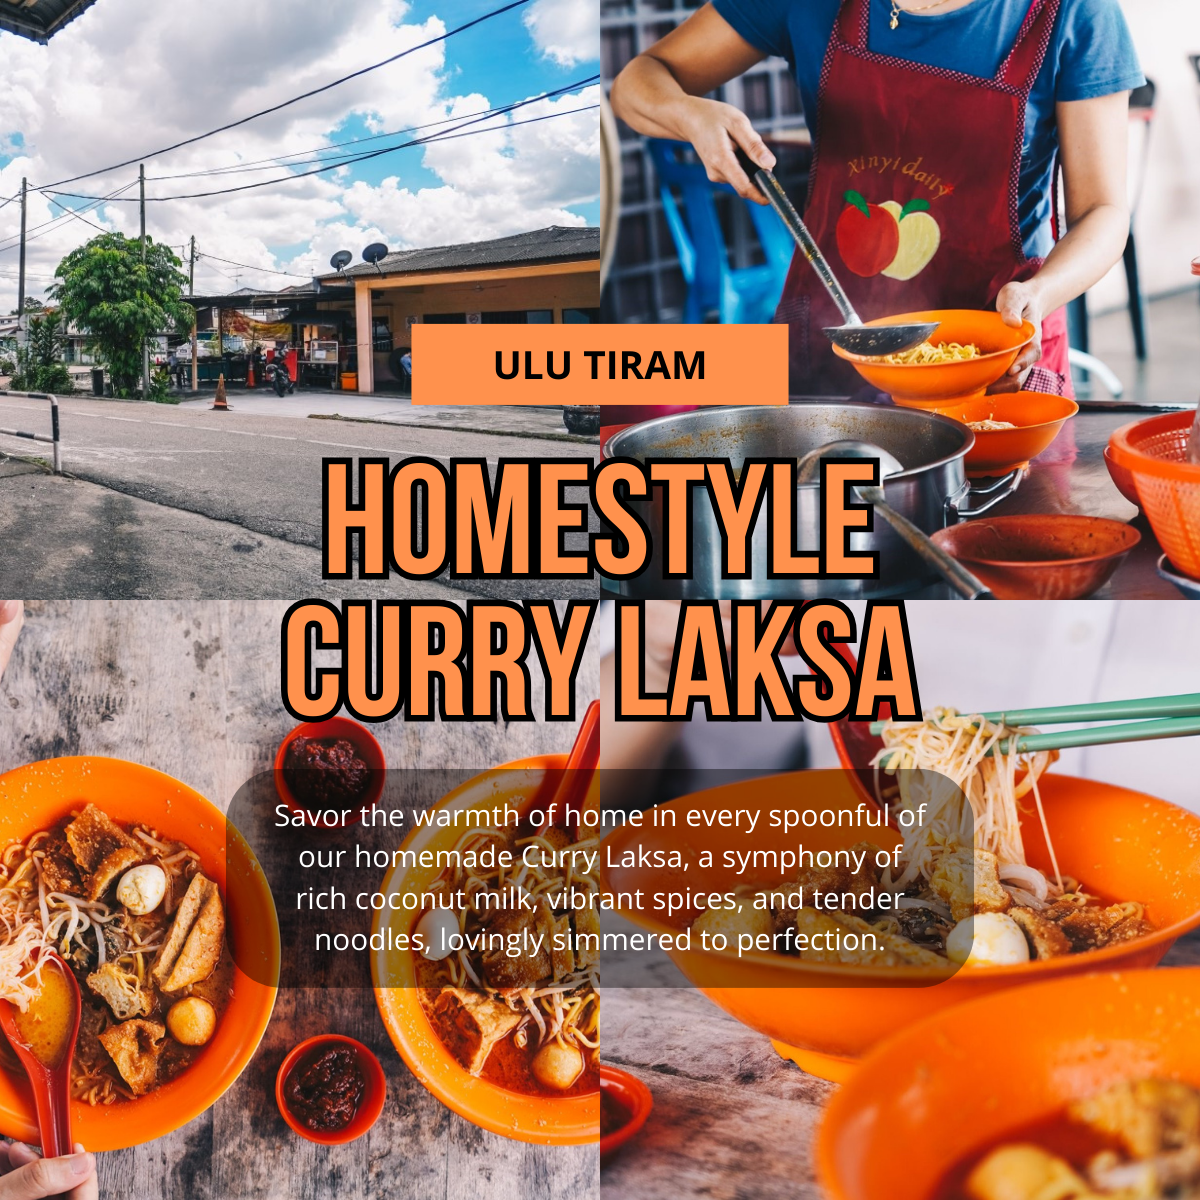 Ulu Tiram Curry Laksa: A Culinary Gem Offering Time-Honored Flavors